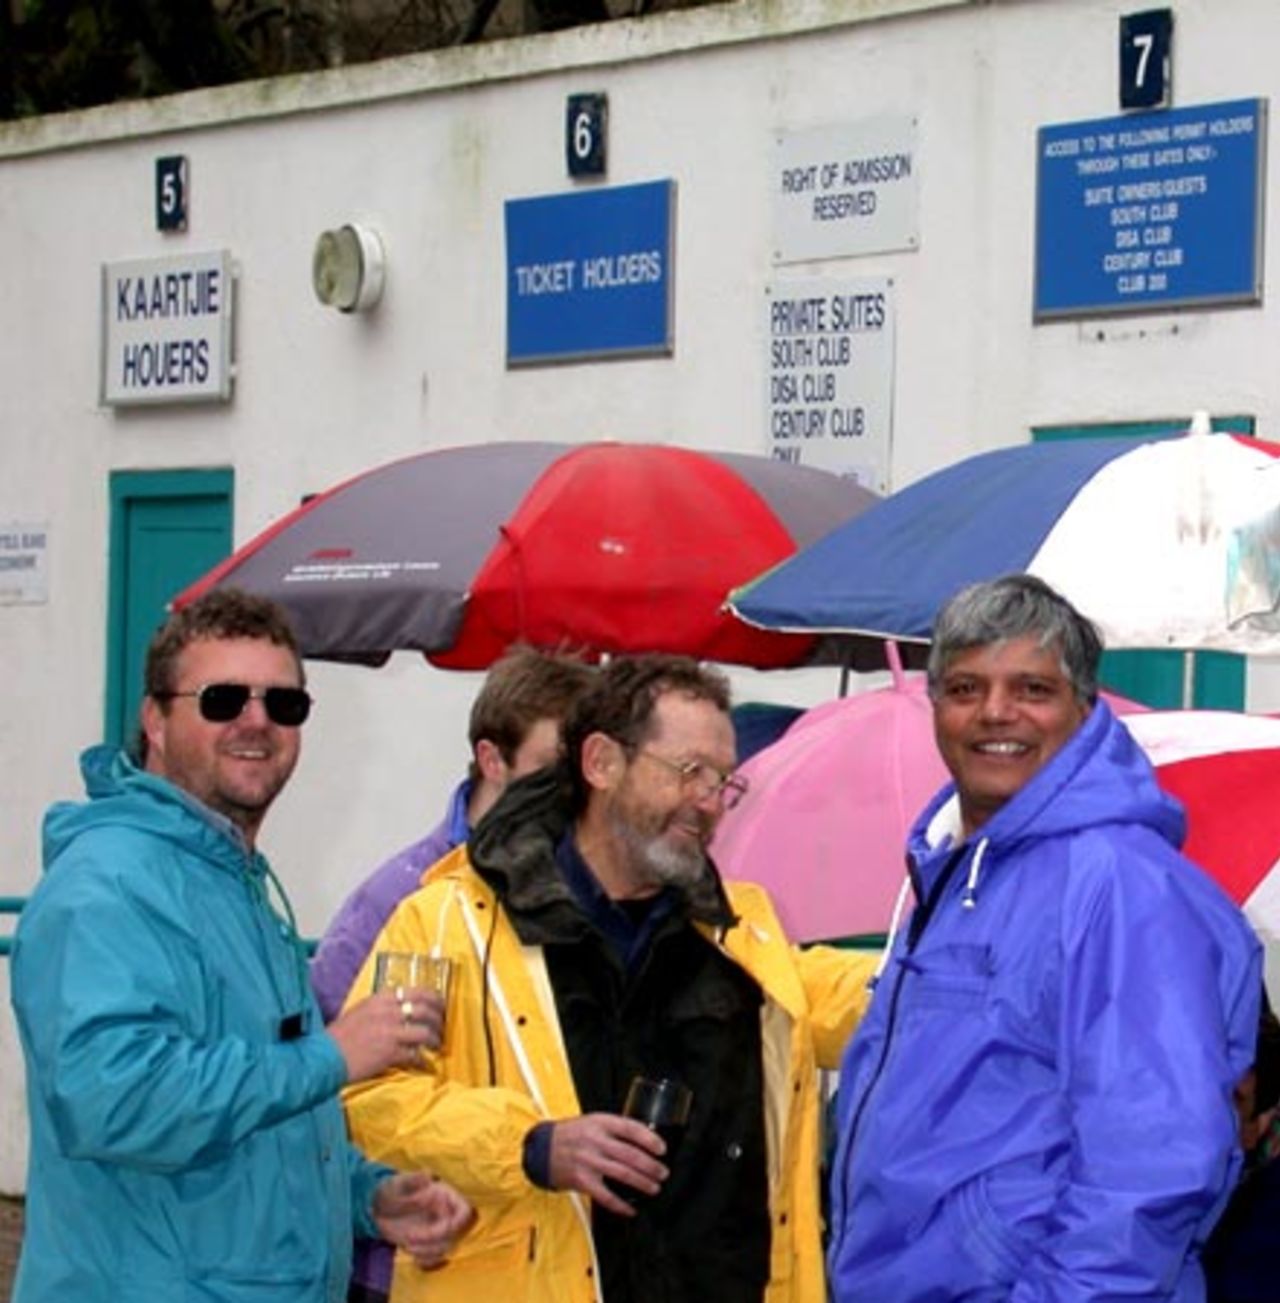 Cricket fans outside Newlands Cricket Ground on Sunday hoping to secure a CWC 2003 ticket